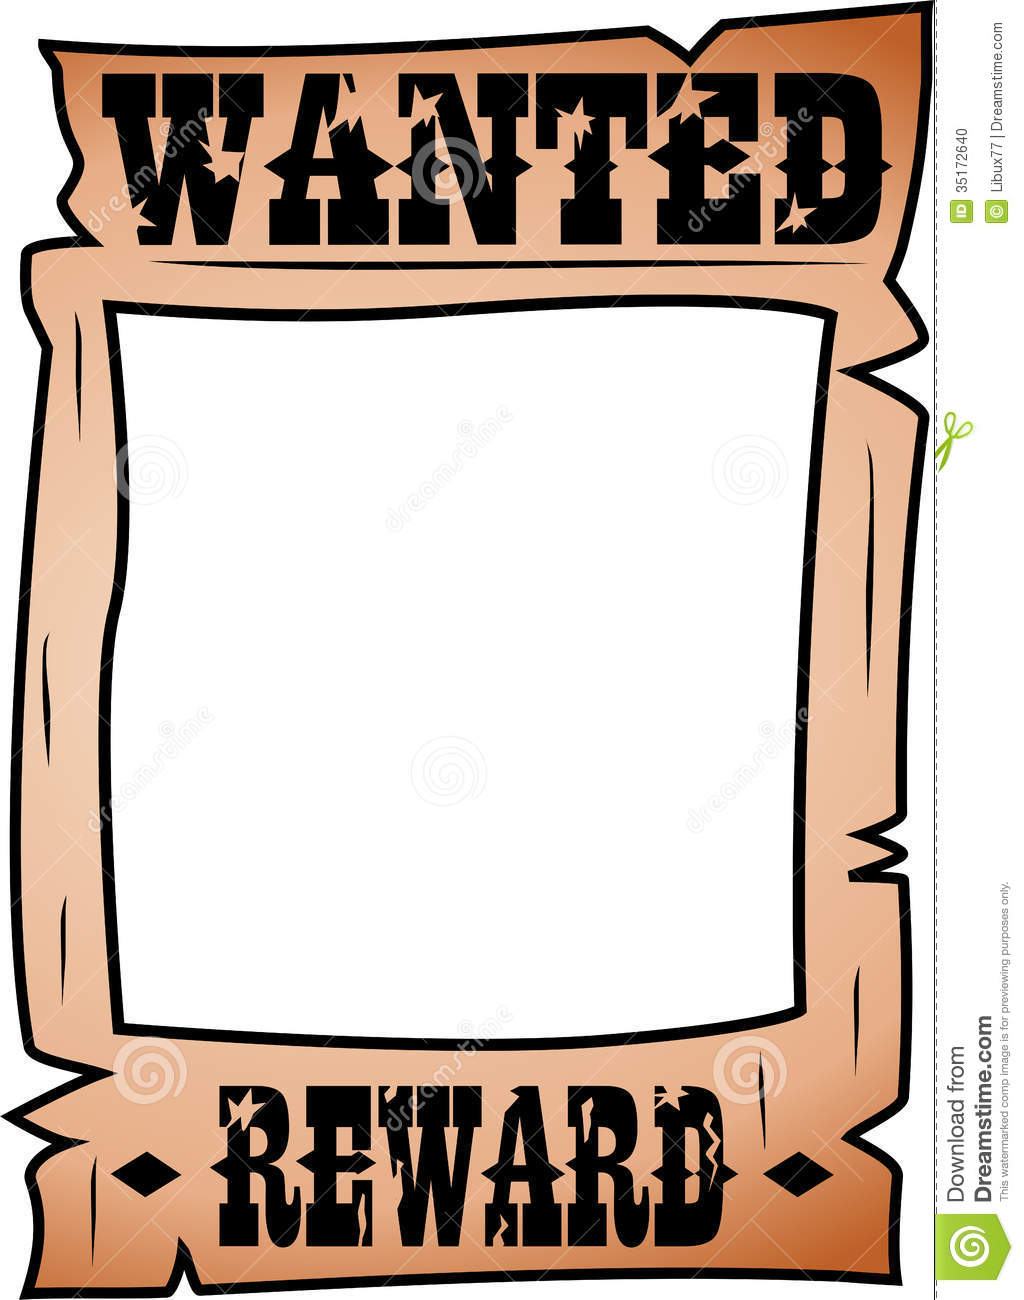 Wanted Poster Clipart Wanted Illustrations And Clipart